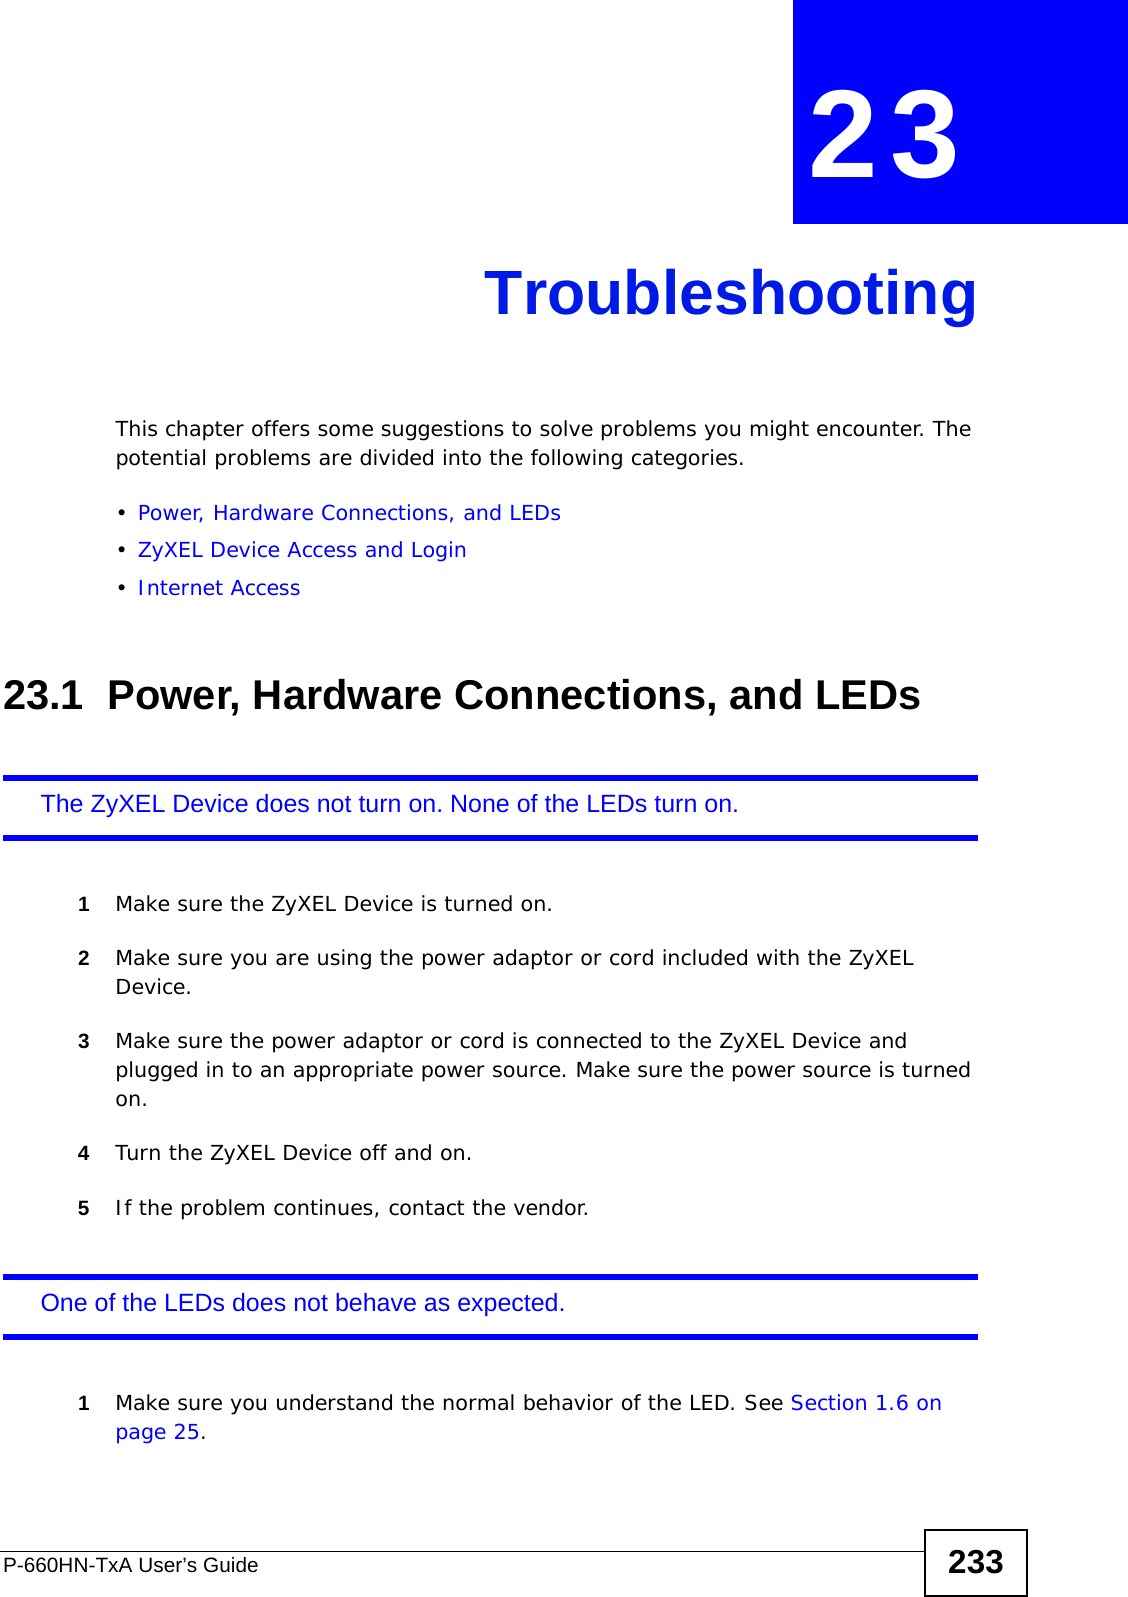 P-660HN-TxA User’s Guide 233CHAPTER  23 TroubleshootingThis chapter offers some suggestions to solve problems you might encounter. The potential problems are divided into the following categories. •Power, Hardware Connections, and LEDs•ZyXEL Device Access and Login•Internet Access23.1  Power, Hardware Connections, and LEDsThe ZyXEL Device does not turn on. None of the LEDs turn on.1Make sure the ZyXEL Device is turned on. 2Make sure you are using the power adaptor or cord included with the ZyXEL Device.3Make sure the power adaptor or cord is connected to the ZyXEL Device and plugged in to an appropriate power source. Make sure the power source is turned on.4Turn the ZyXEL Device off and on.5If the problem continues, contact the vendor.One of the LEDs does not behave as expected.1Make sure you understand the normal behavior of the LED. See Section 1.6 on page 25.